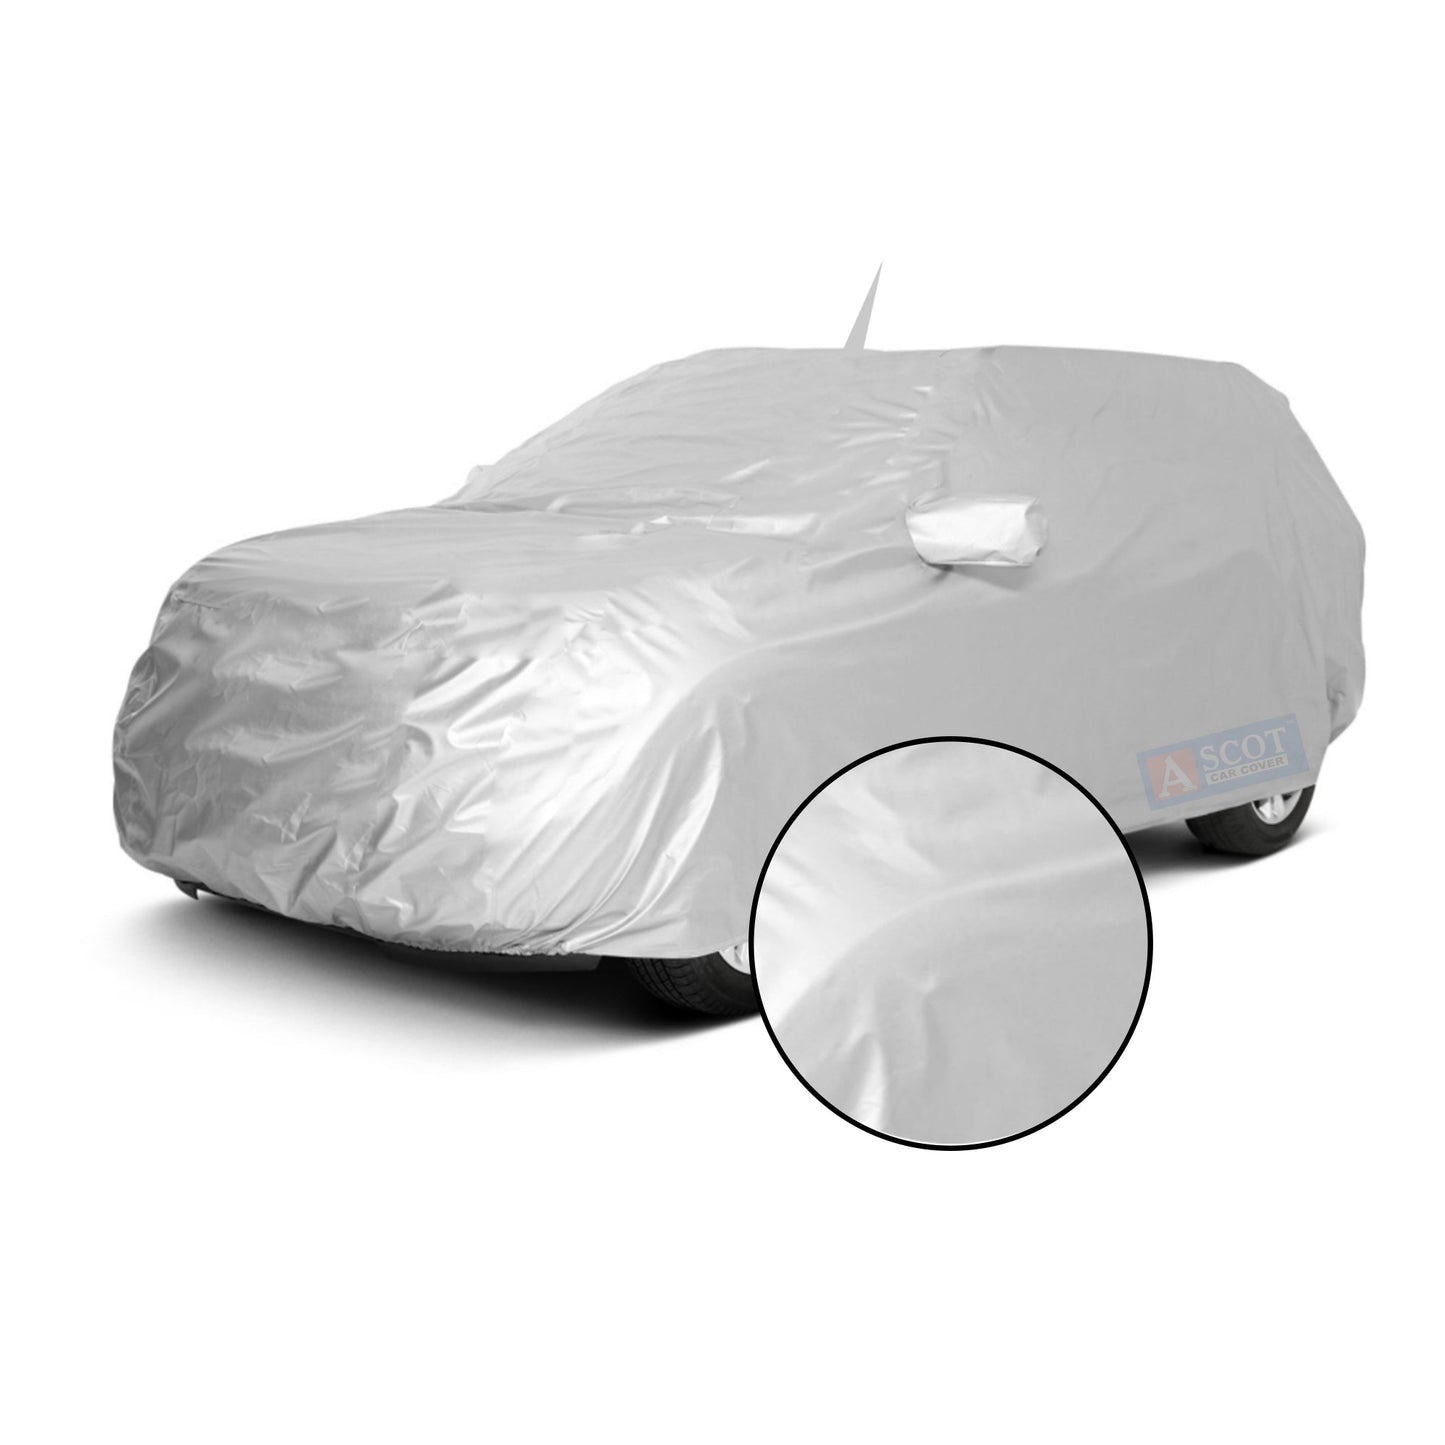 Ascot Mercedes-Benz G-Class 2018-2023 Model Car Body Cover Dust Proof, Trippel Stitched